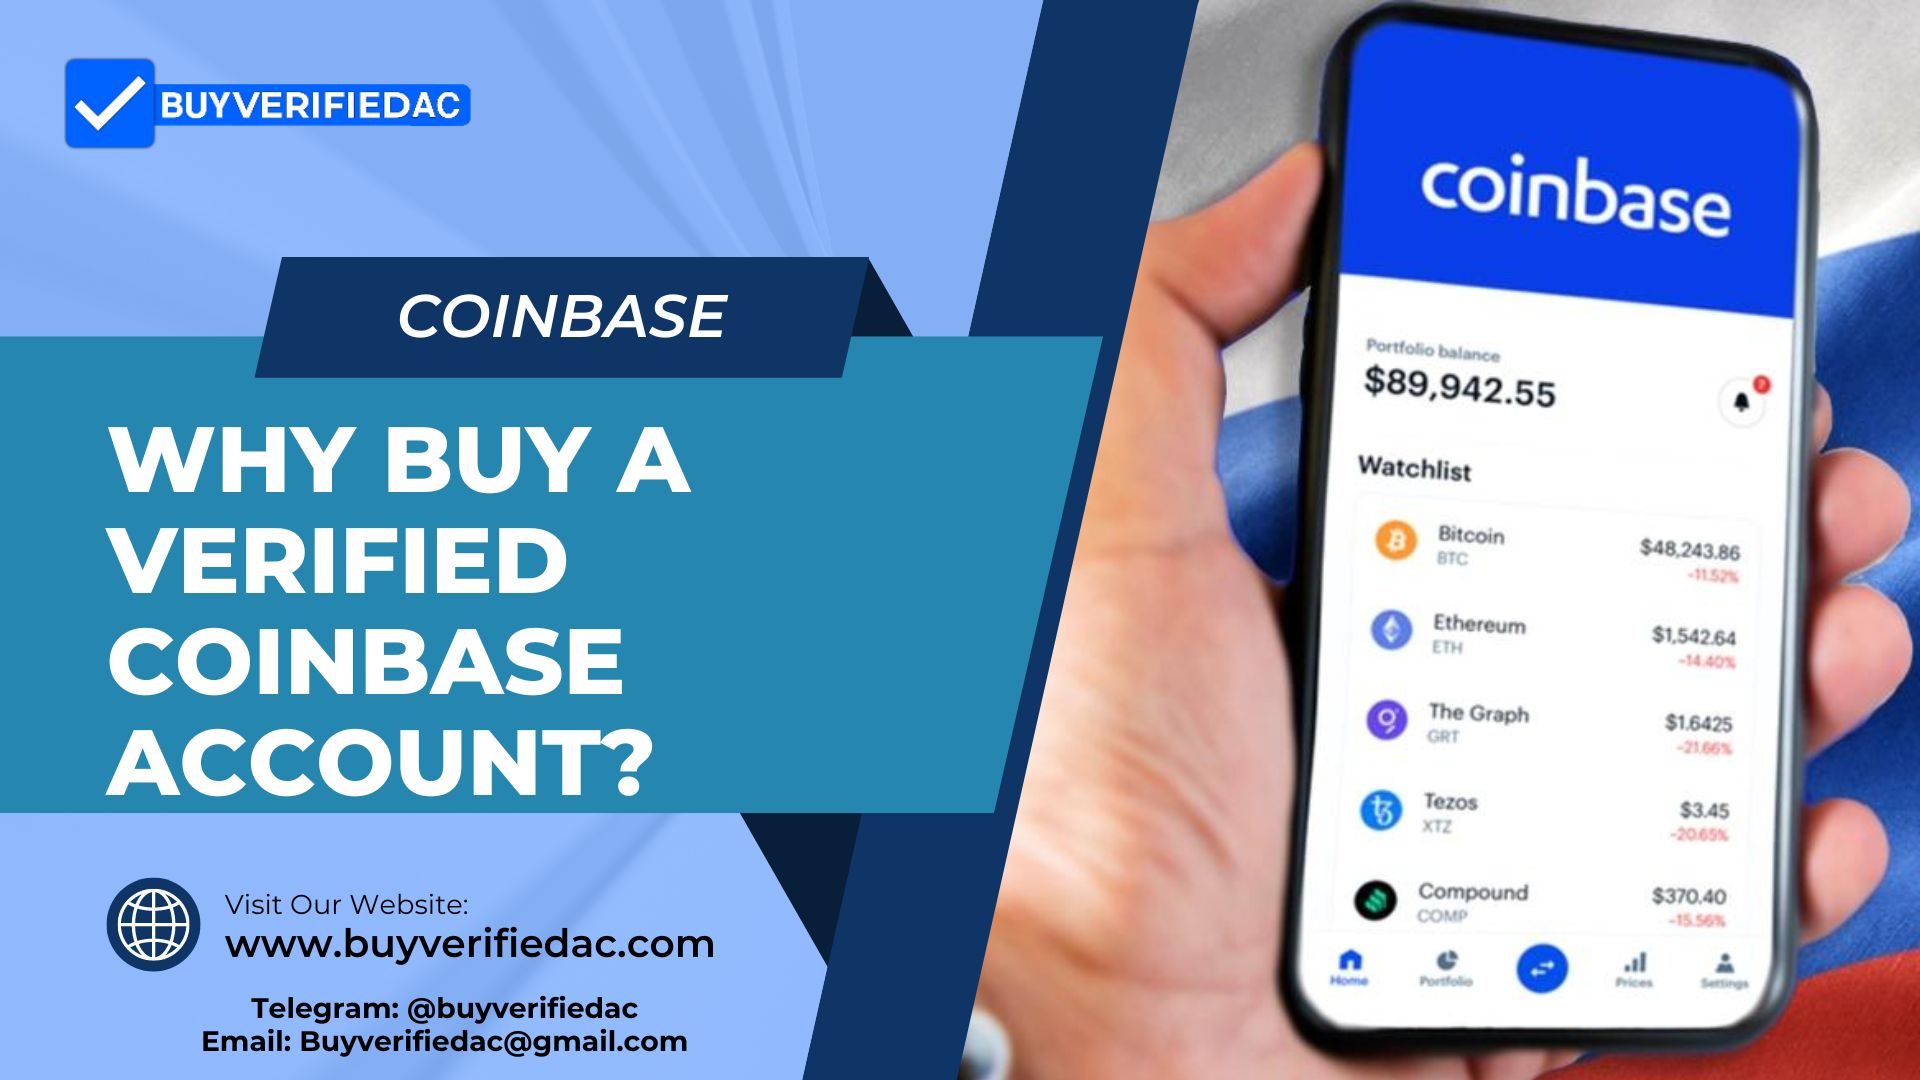 Why Buy a Verified Coinbase Account (2)